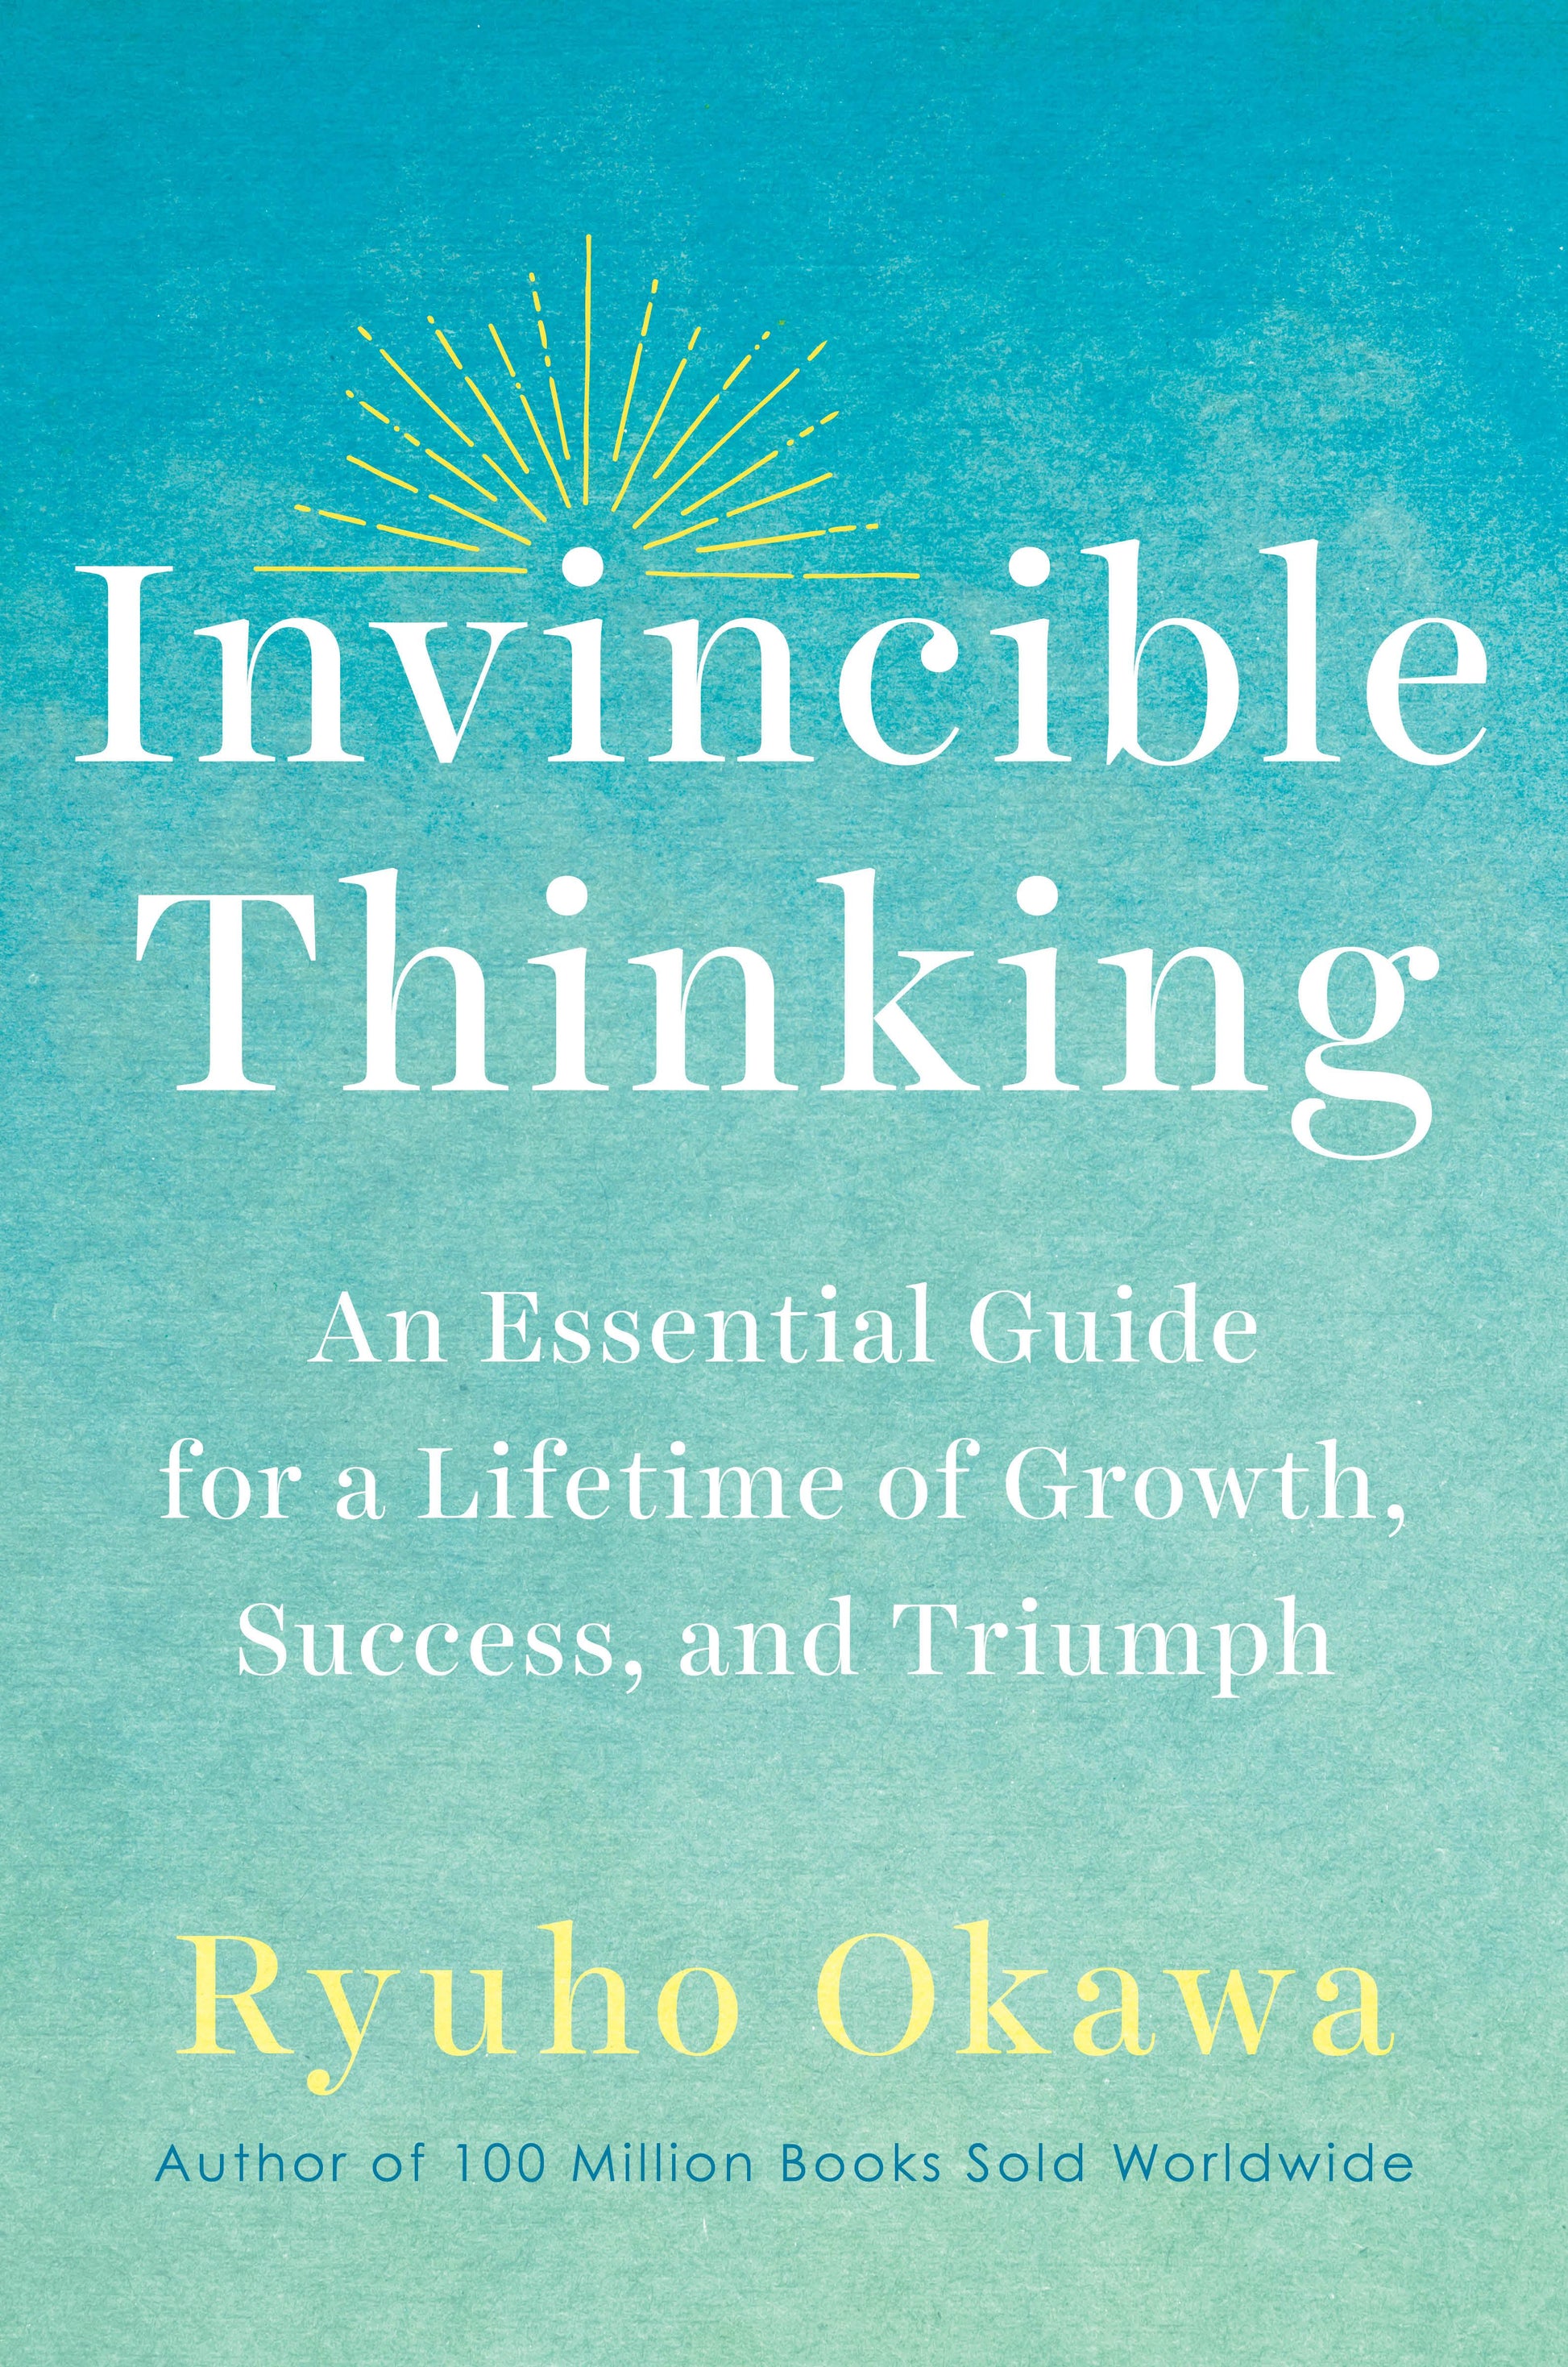 Invincible Thinking : An Essential Guide for a Lifetime of Growth, Success, and Triumph, Ryuho Okawa, English - IRH Press International